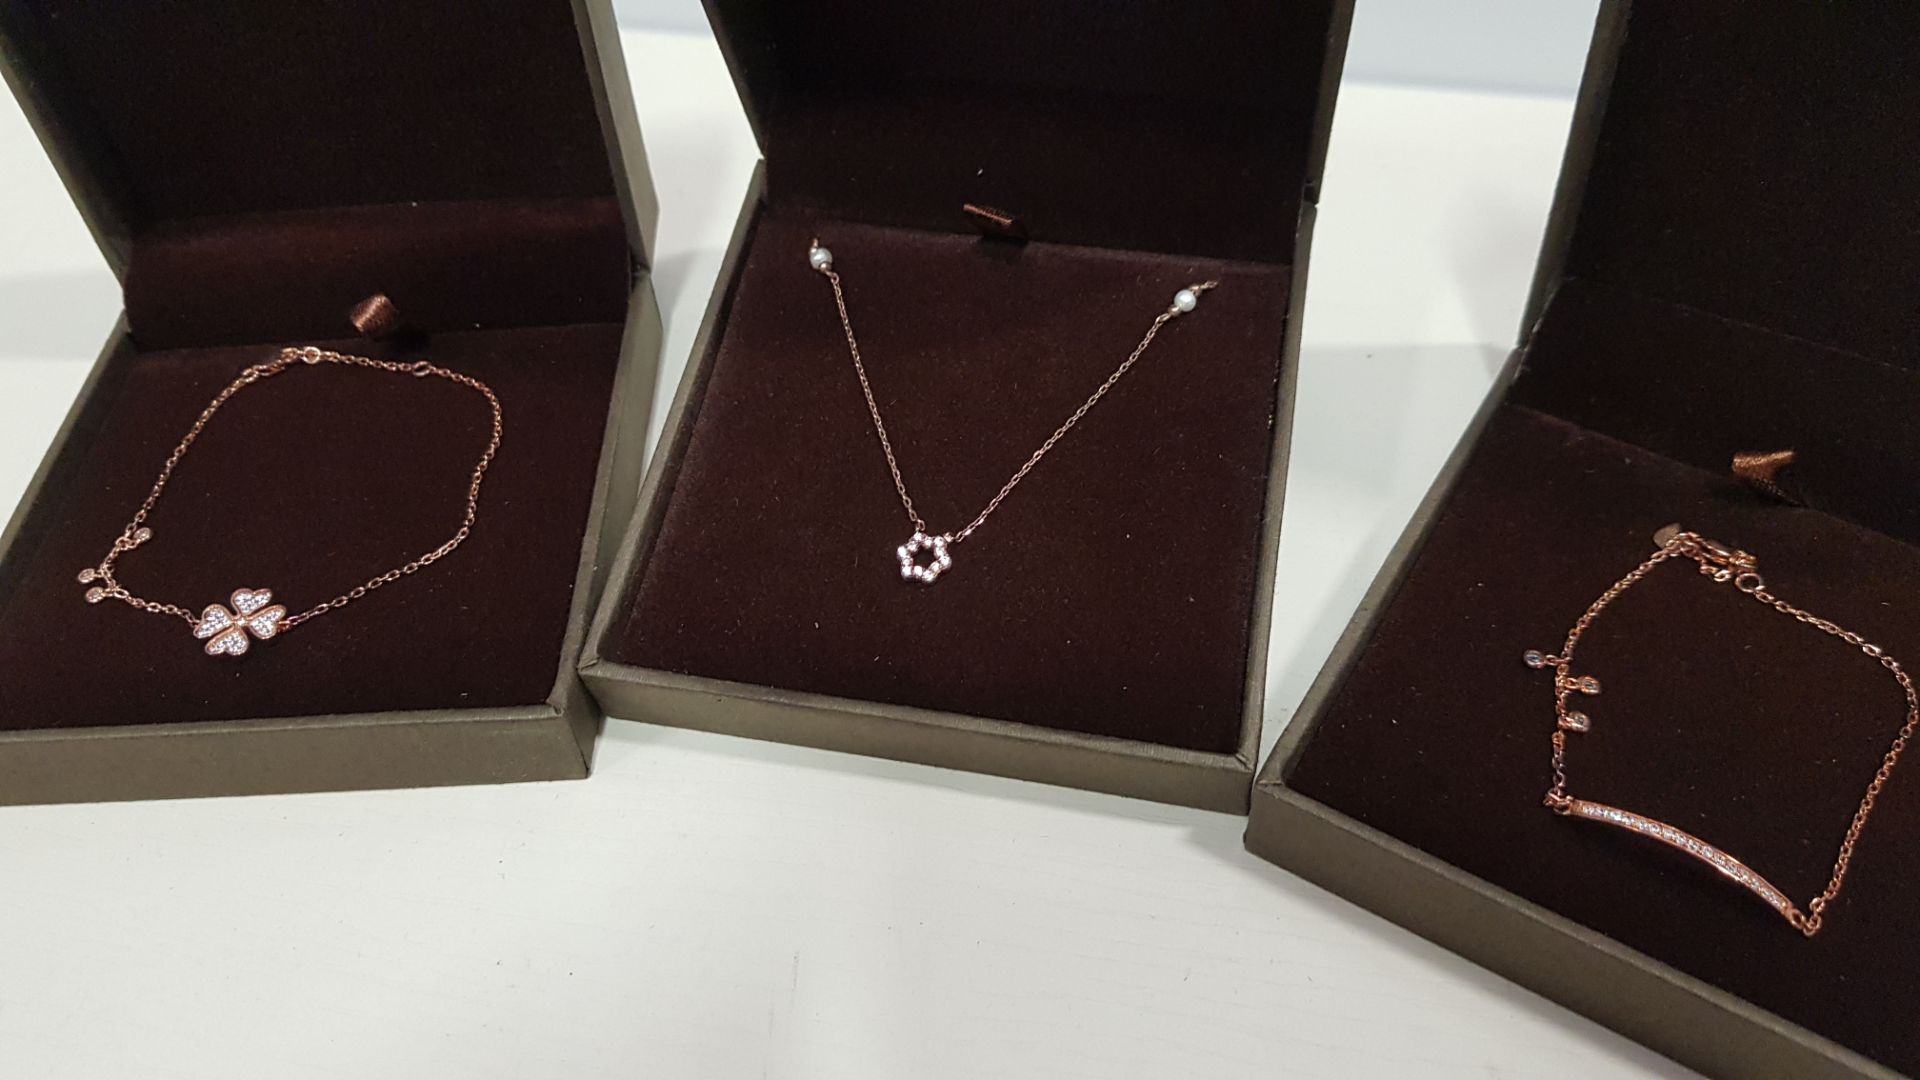 20 X ASSORTED BRAND NEW BOXED GAVI LOT CONTAINING ROSE GOLD COLOURED BRACELET WITH PENDANT, ROSE